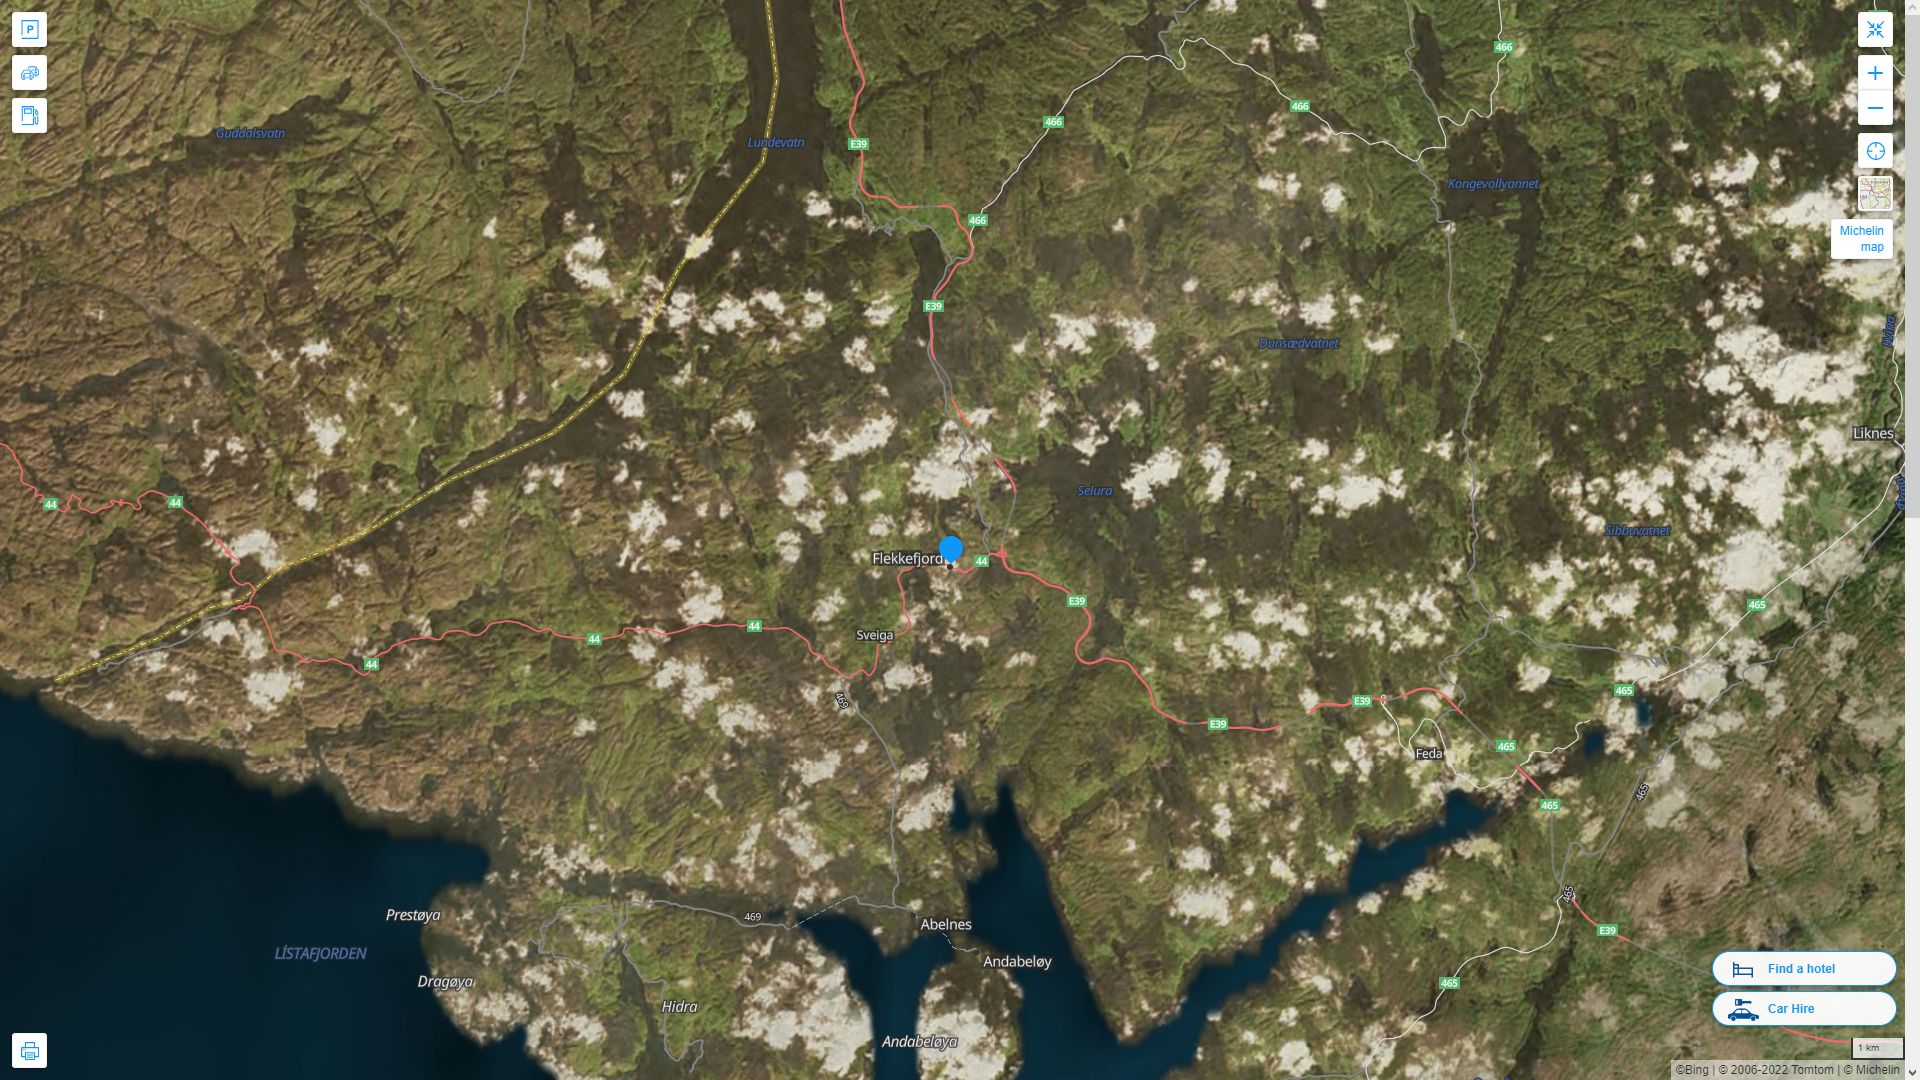 Flekkefjord Highway and Road Map with Satellite View